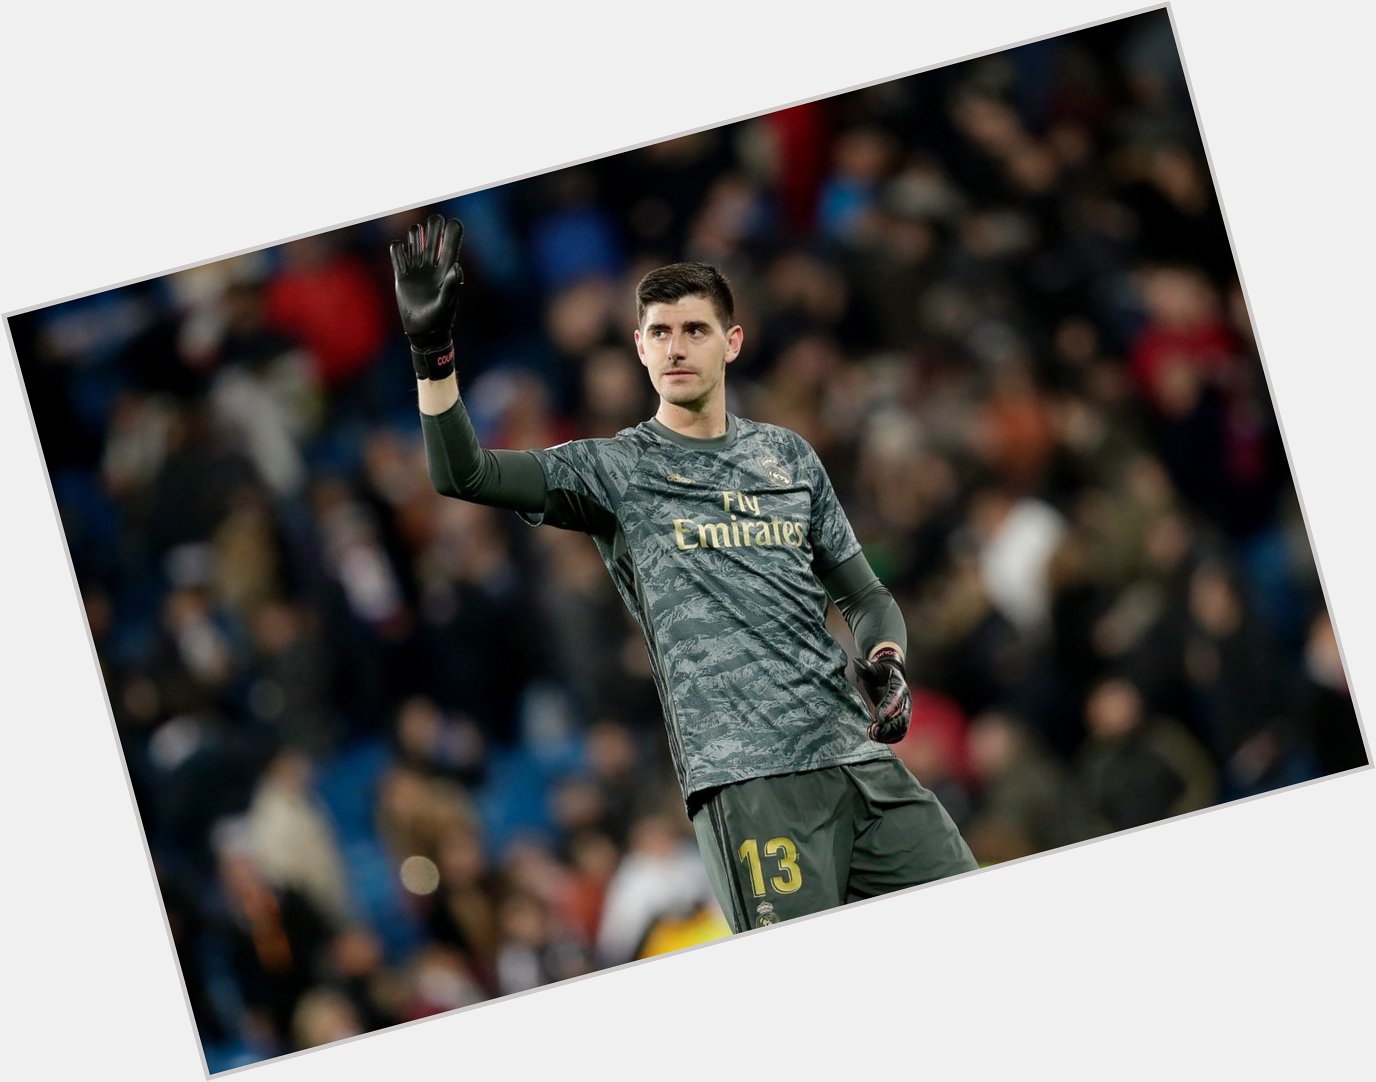 FACT: Happy birthday to Real Madrid goalkeeper Thibaut Courtois who has turned 28 today. 